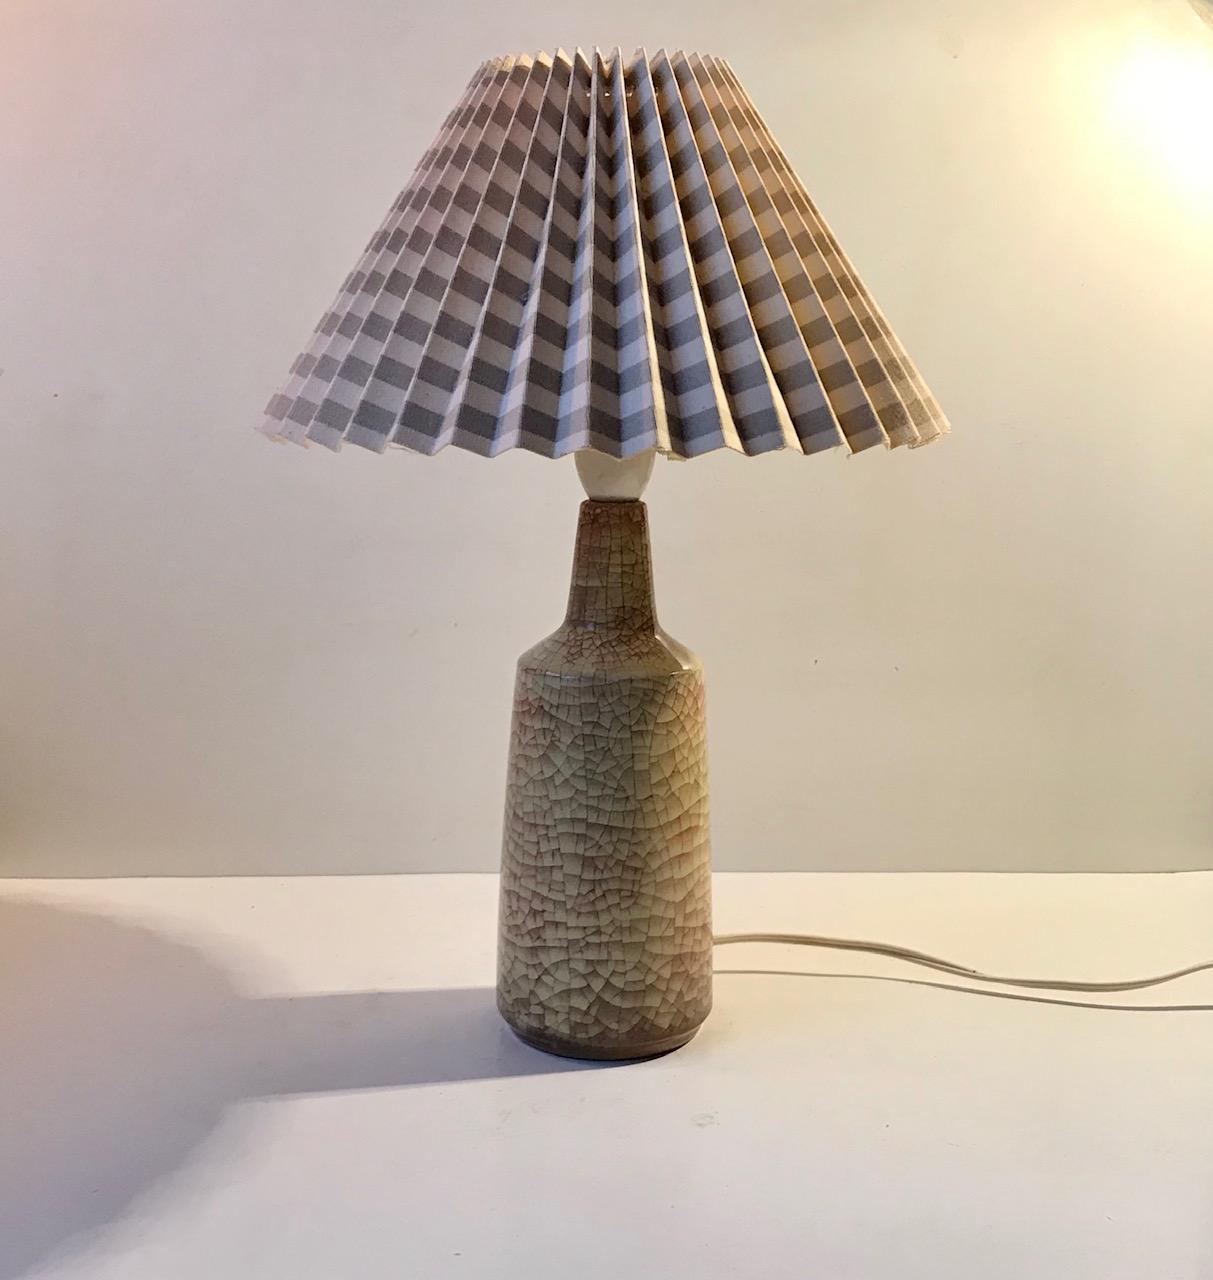 Table lamp designed by Marianne Starck for Michael Andersen & Son, Denmark. Delicate and dusty pastel 'Persia' glazes that imitates cracks. The height of 11 inches (39 cm) is without shade and with bulb. The shade in the photos is a model shade so